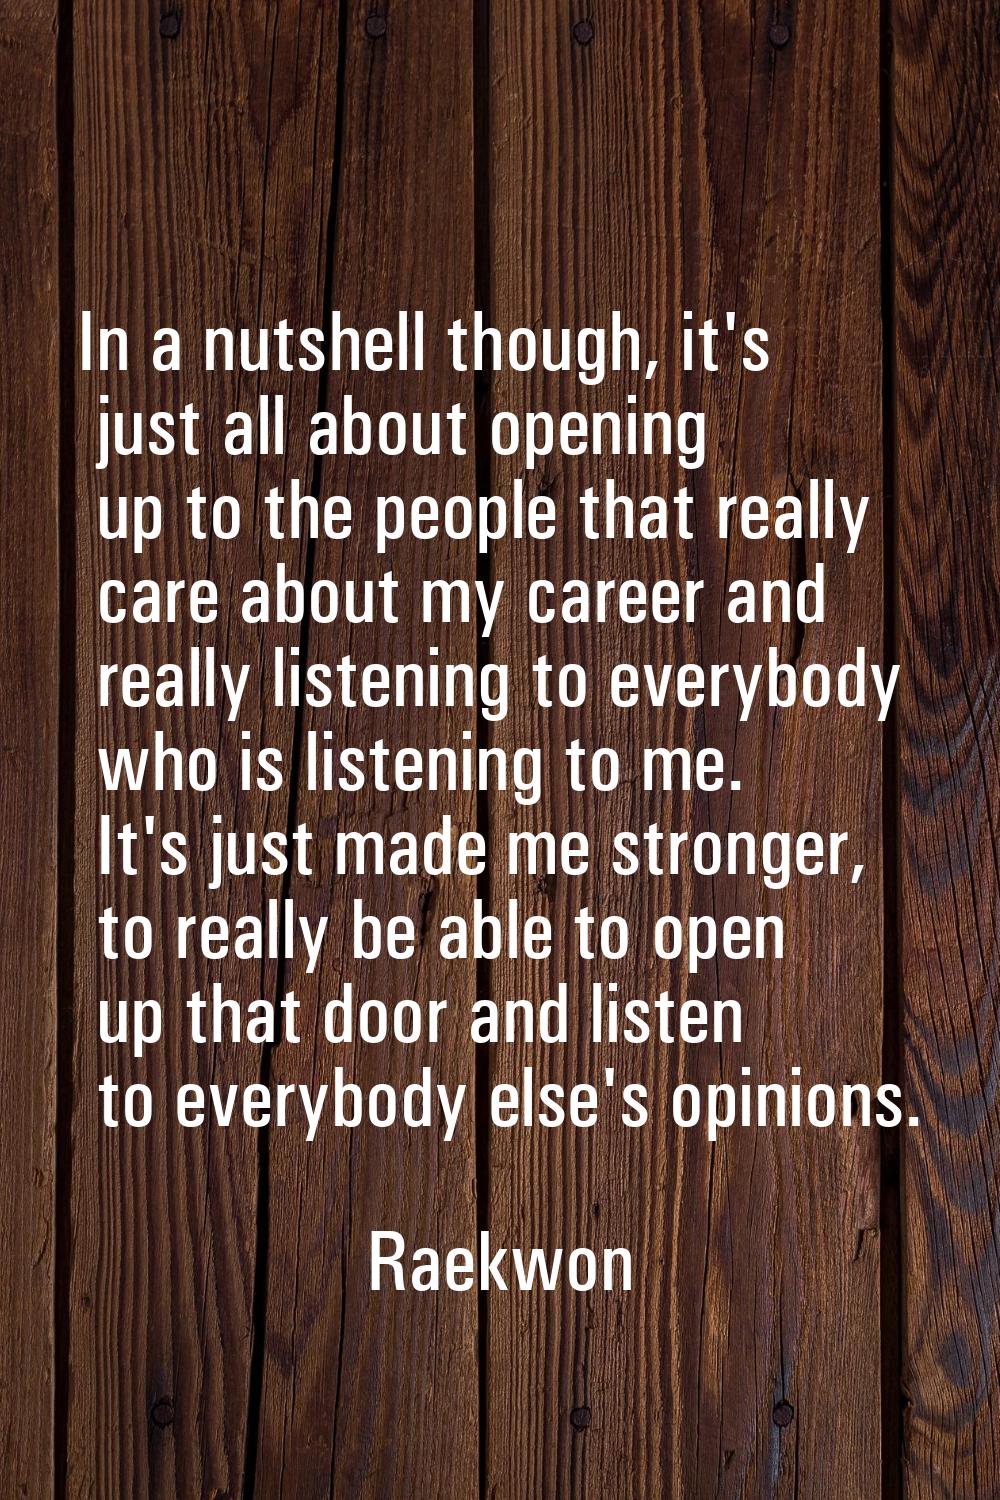 In a nutshell though, it's just all about opening up to the people that really care about my career